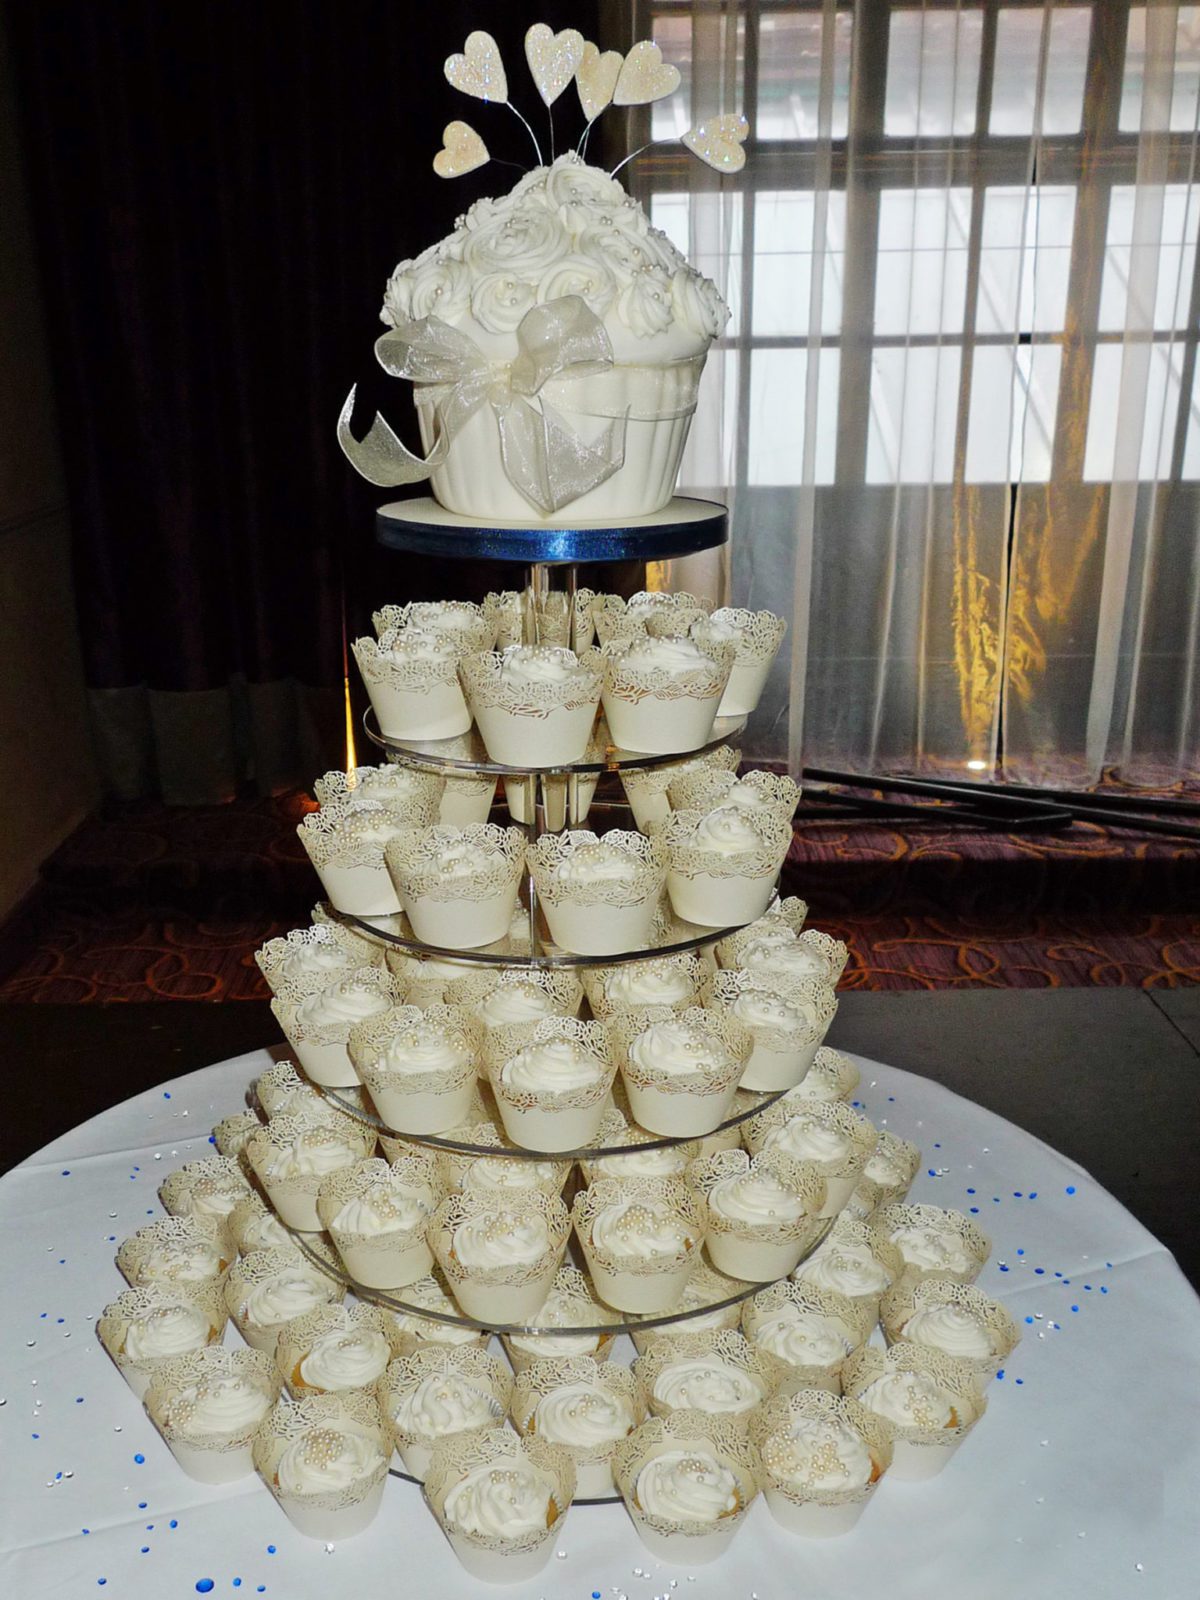 Five alternatives to the traditional wedding cake